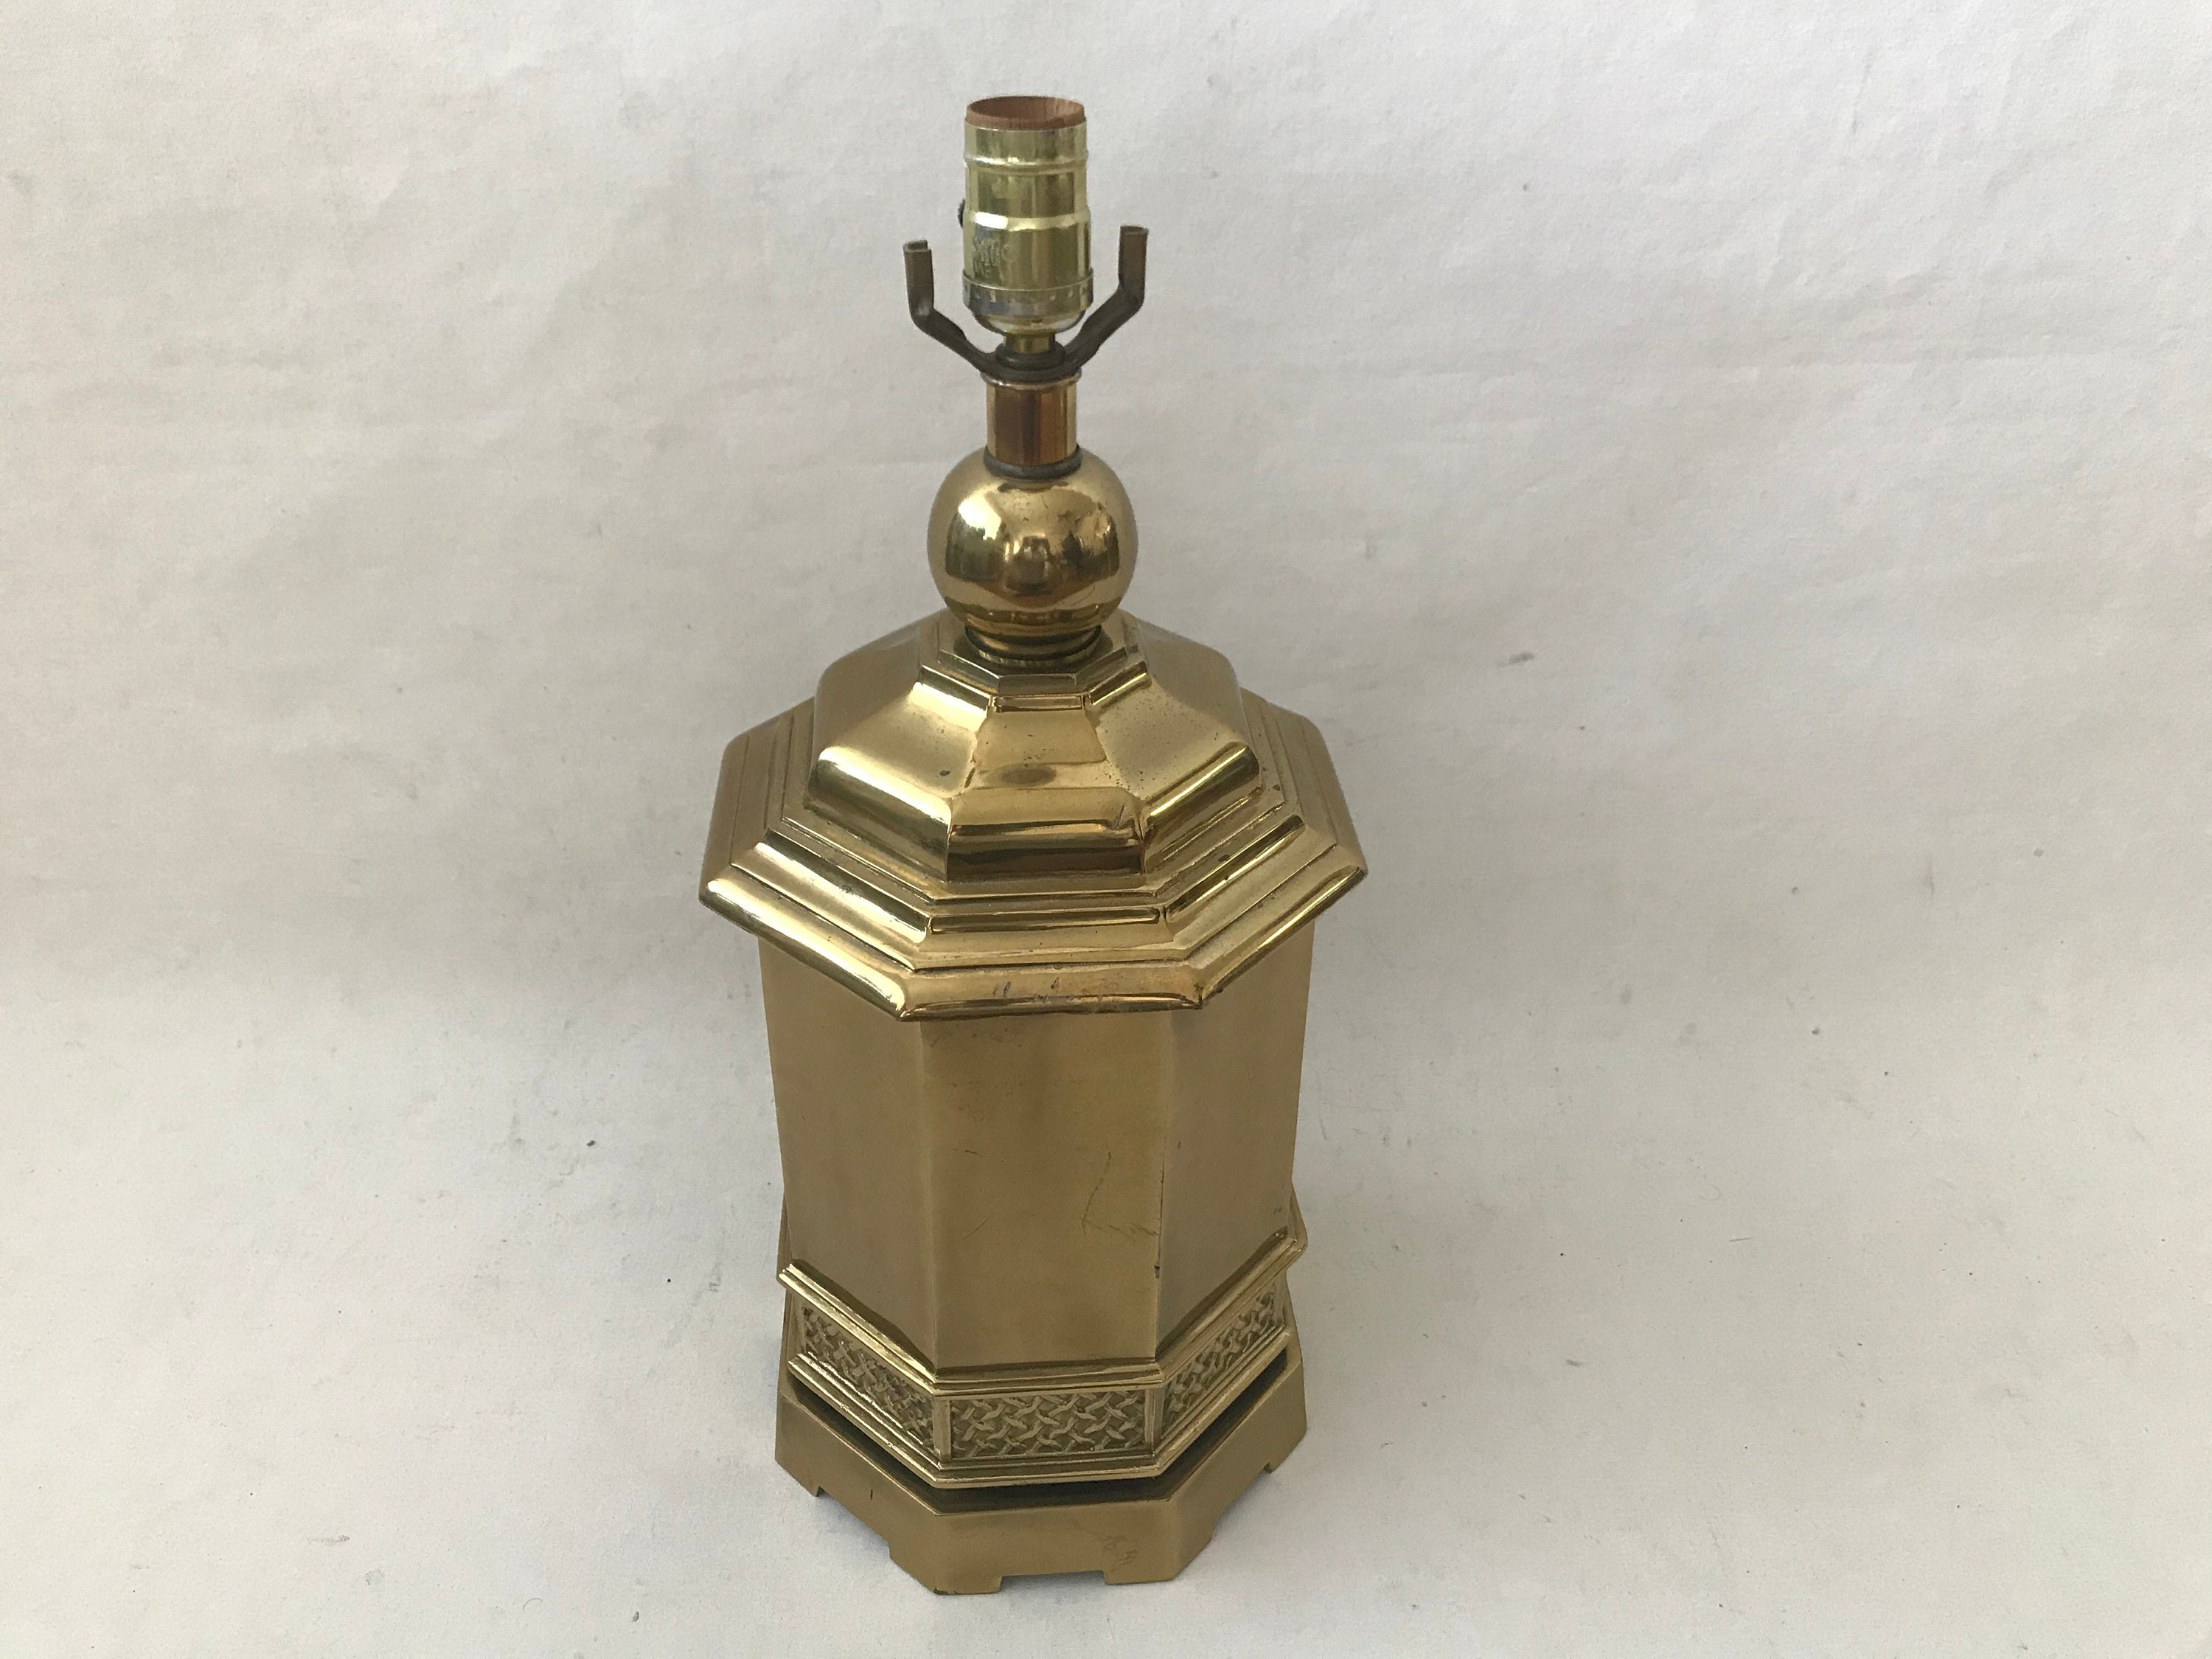 Ethan Allen Vintage Ethan Allen Brushed Brass Tea Canister Table Lamp Chinoiserie Asian 